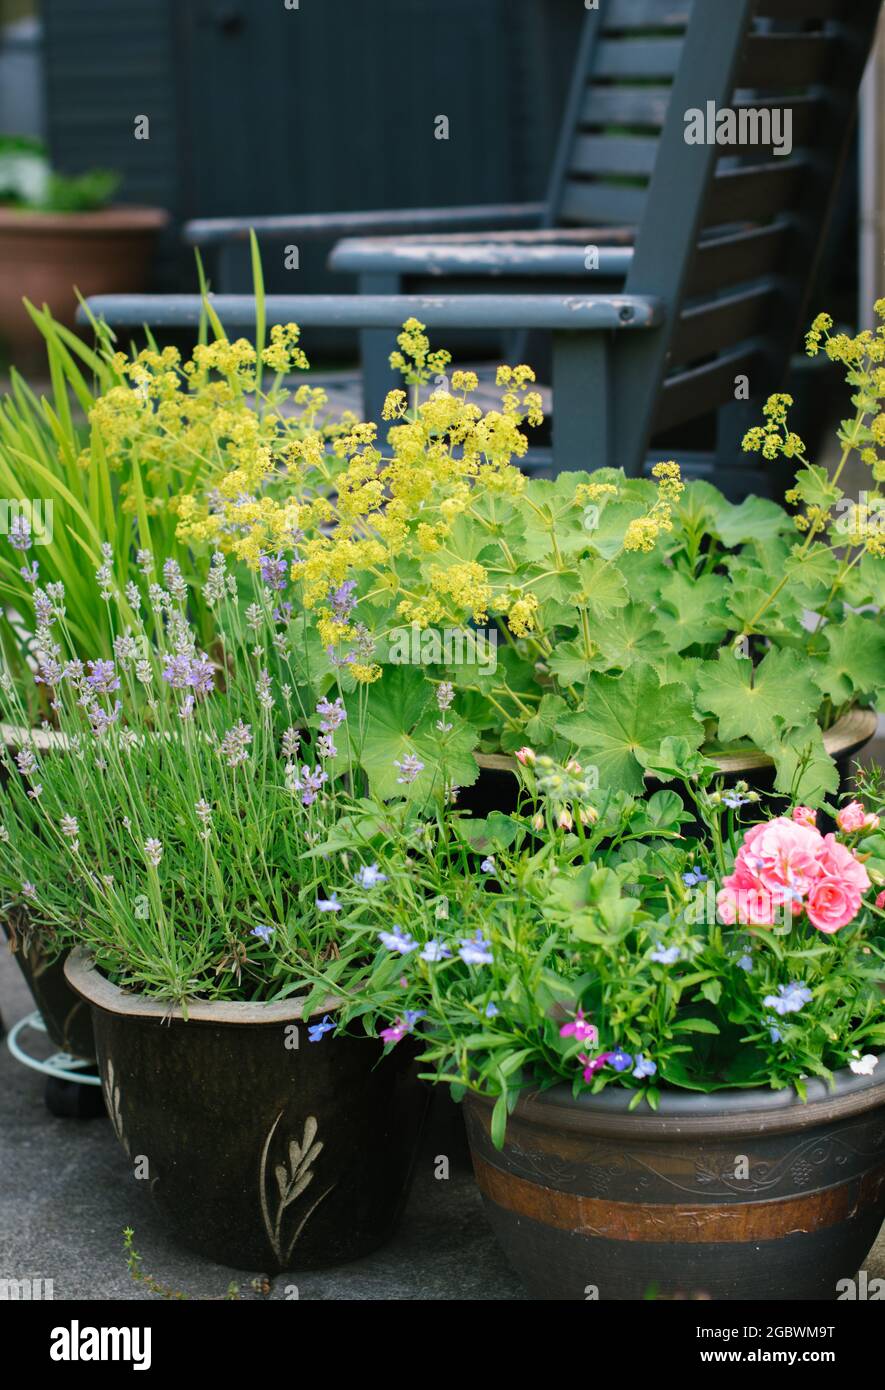 flowering plants in containers Stock Photo